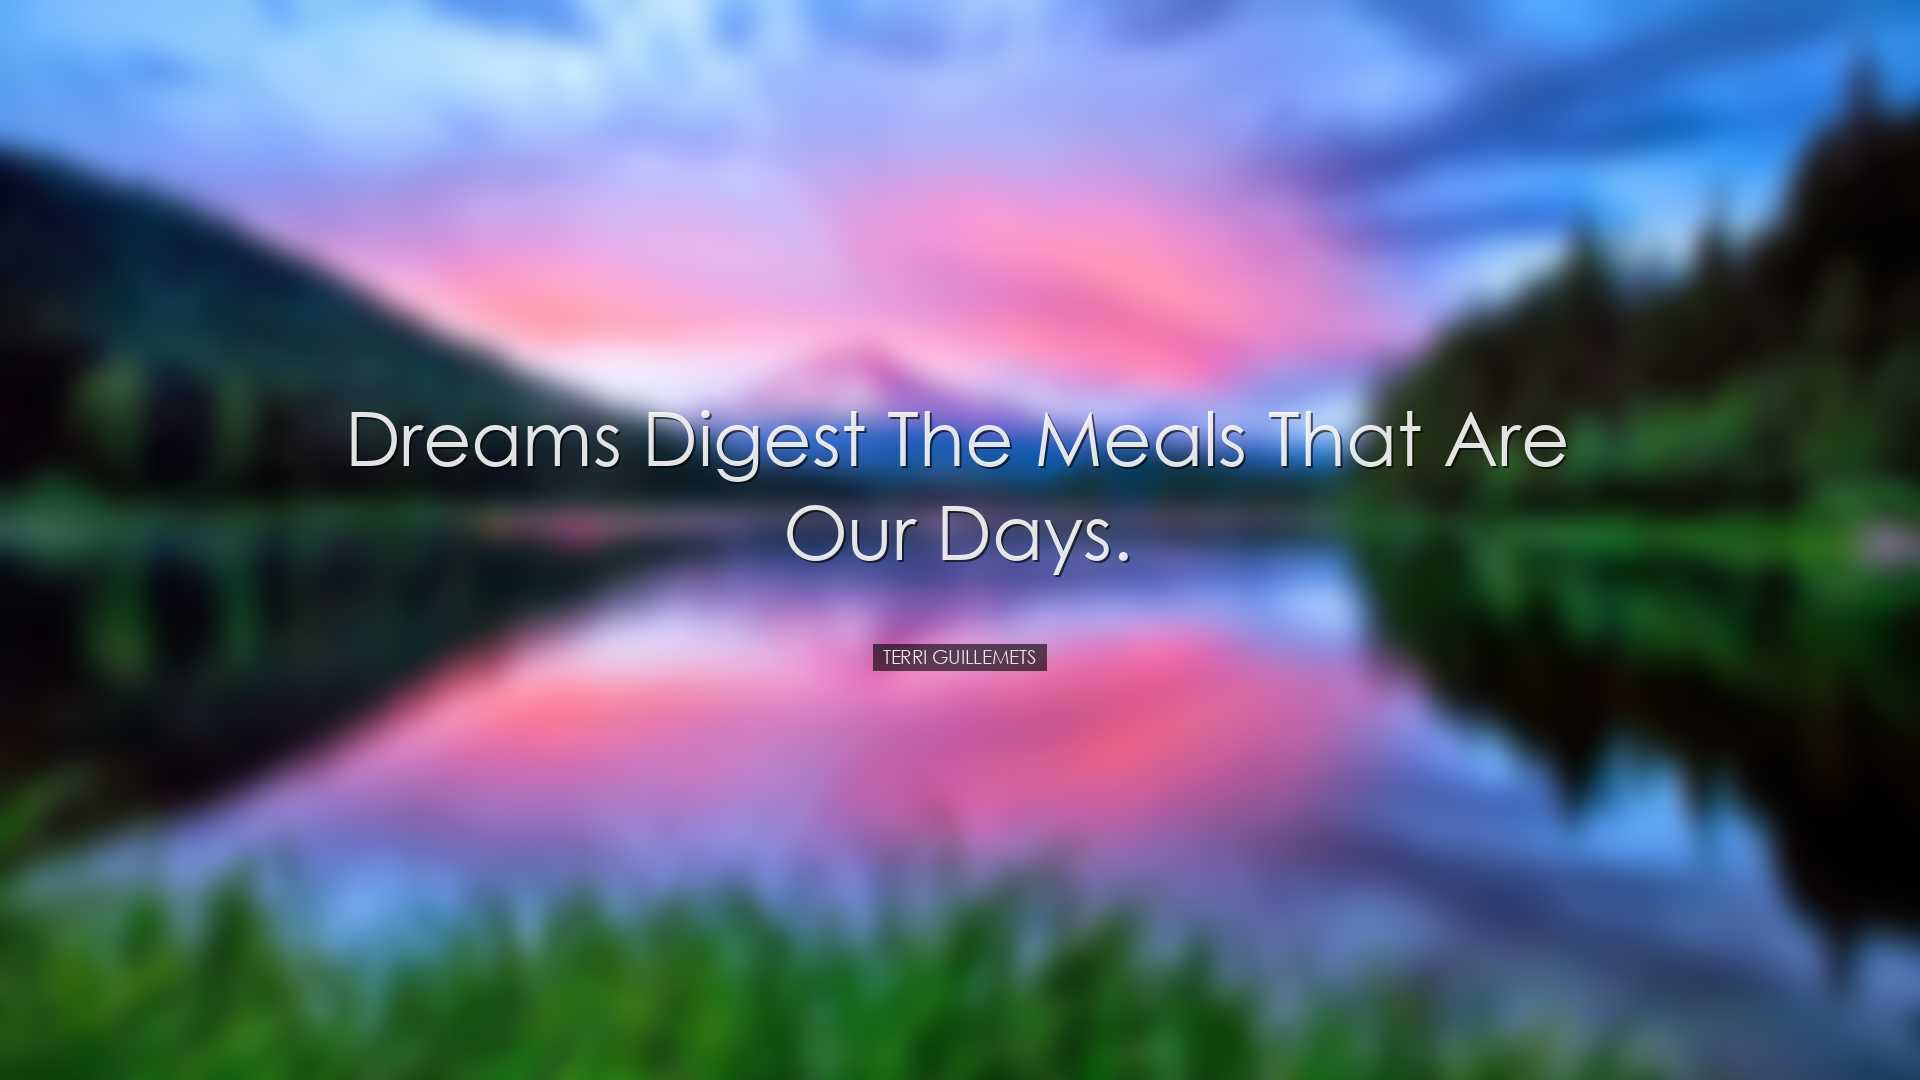 Dreams digest the meals that are our days. - Terri Guillemets